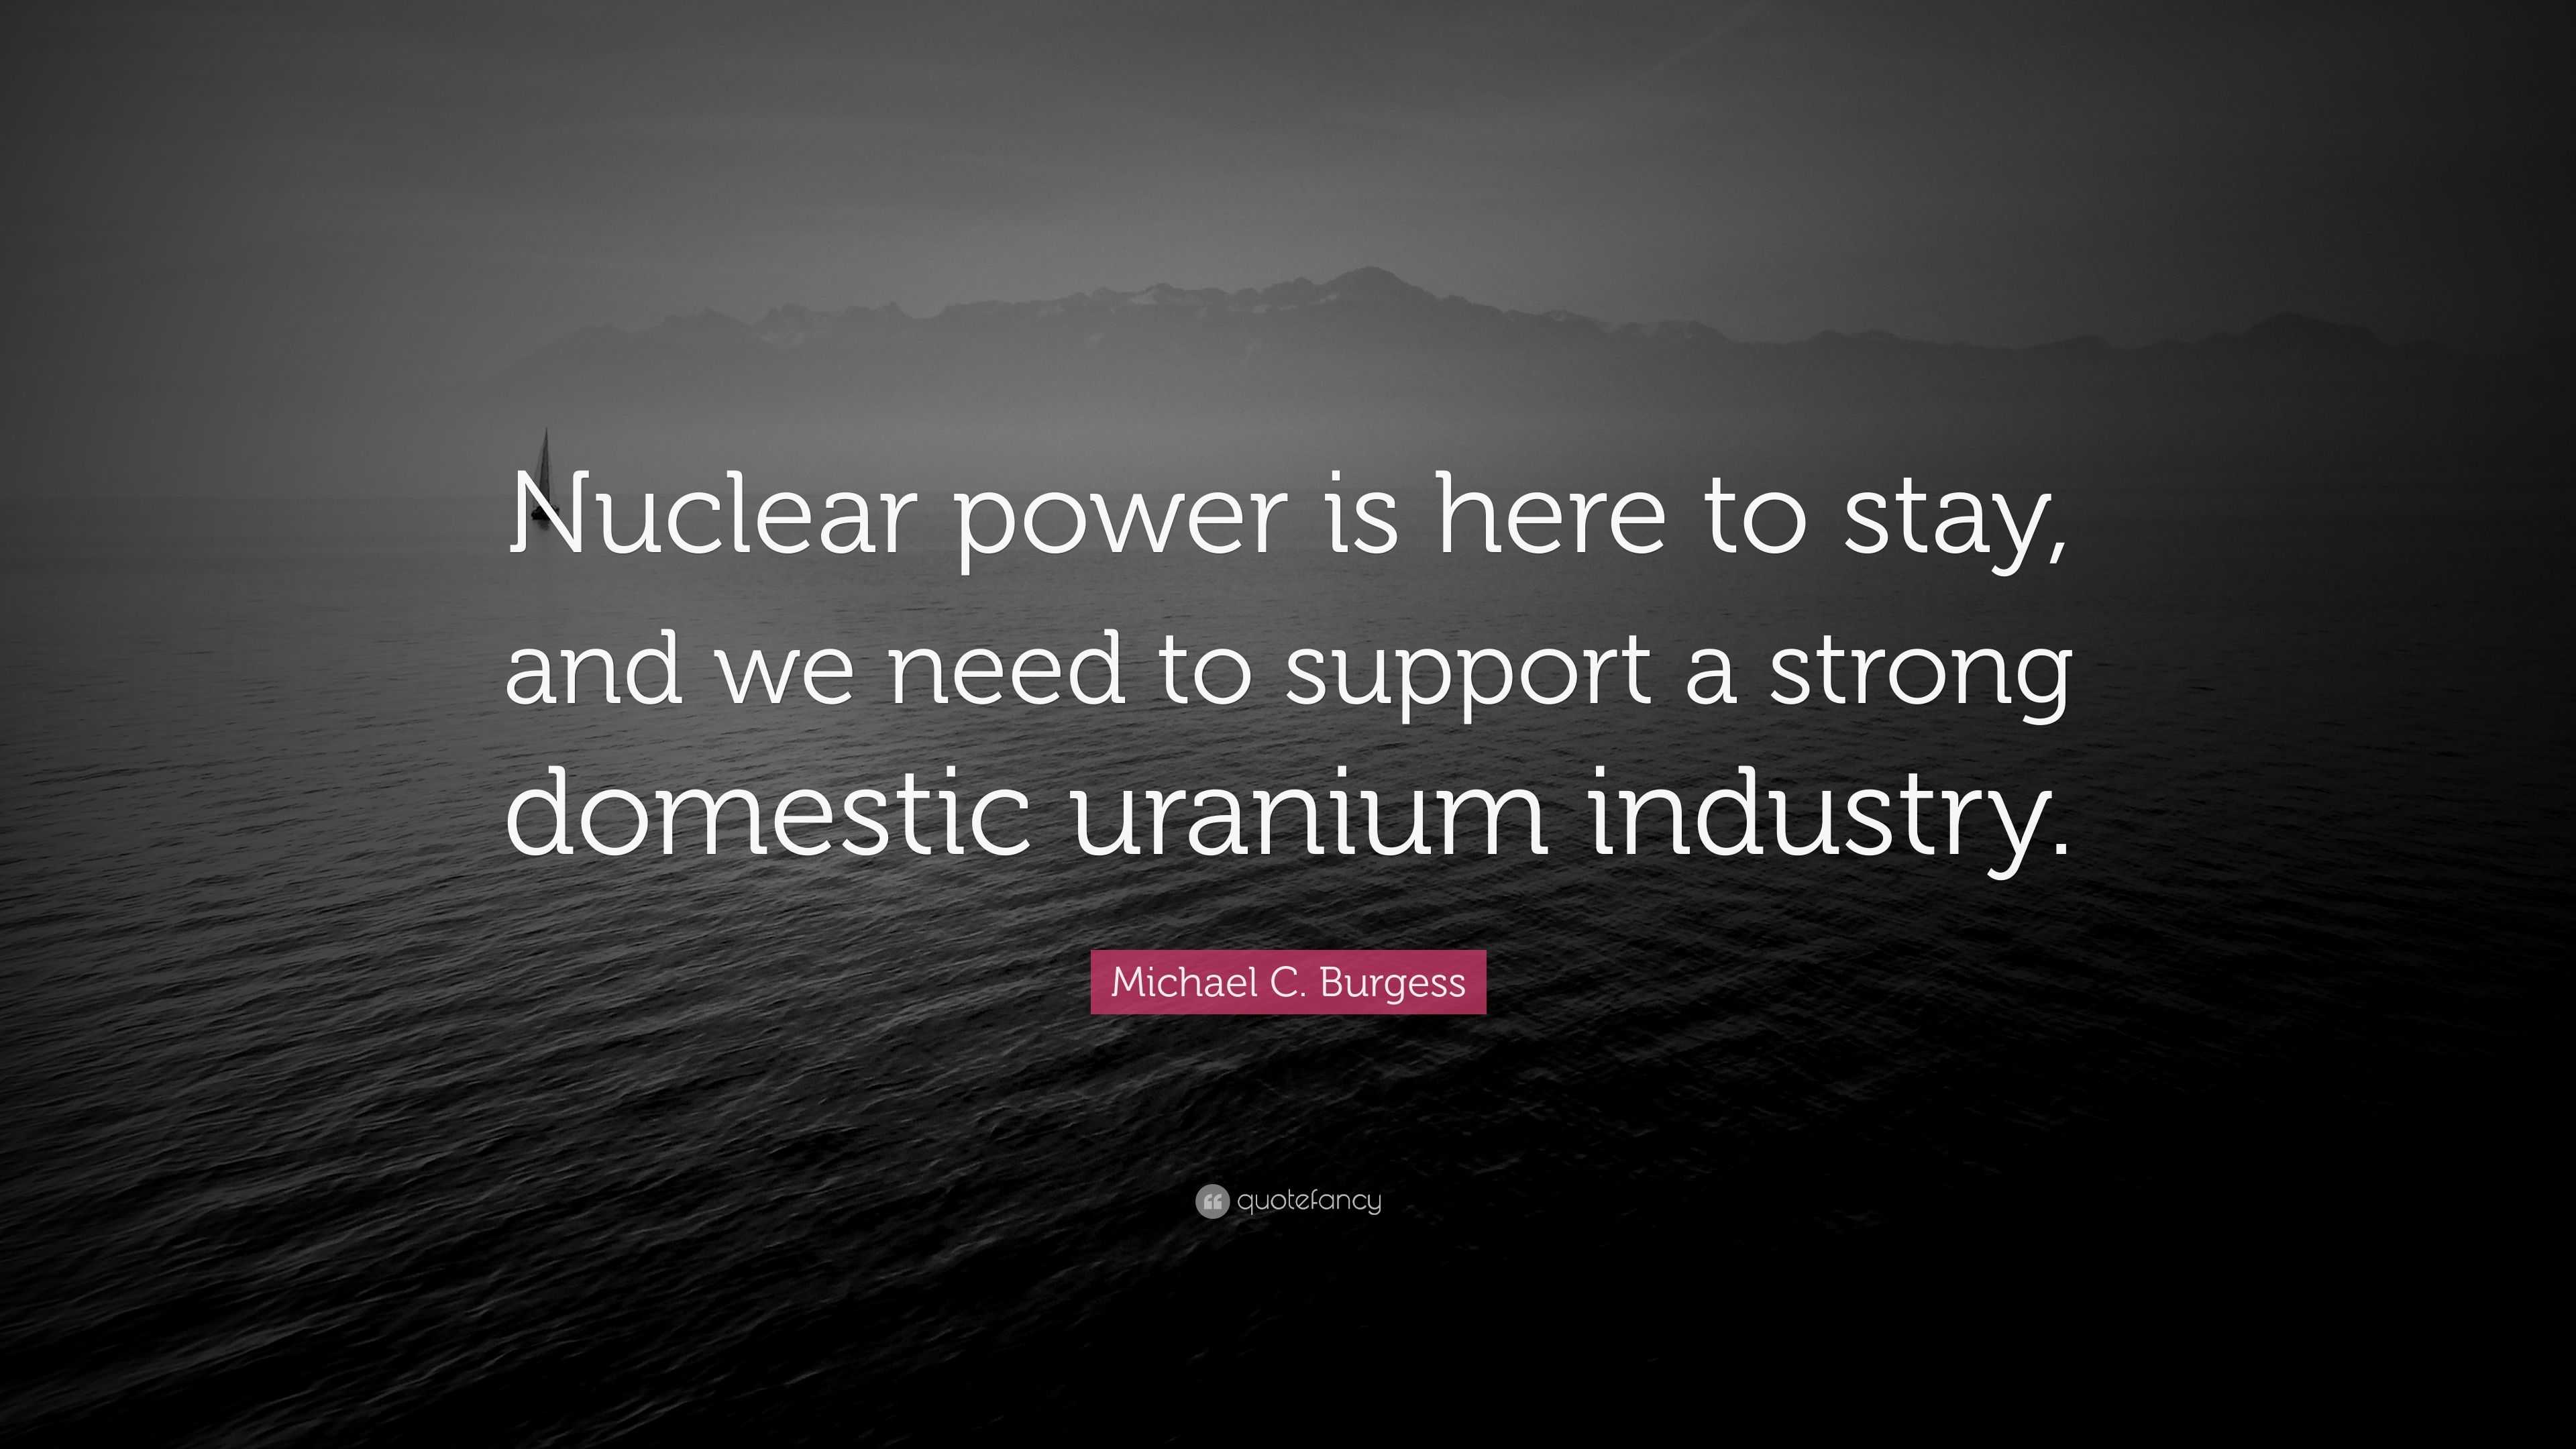 Michael C. Burgess Quote: “Nuclear power is here to stay, and we need ...